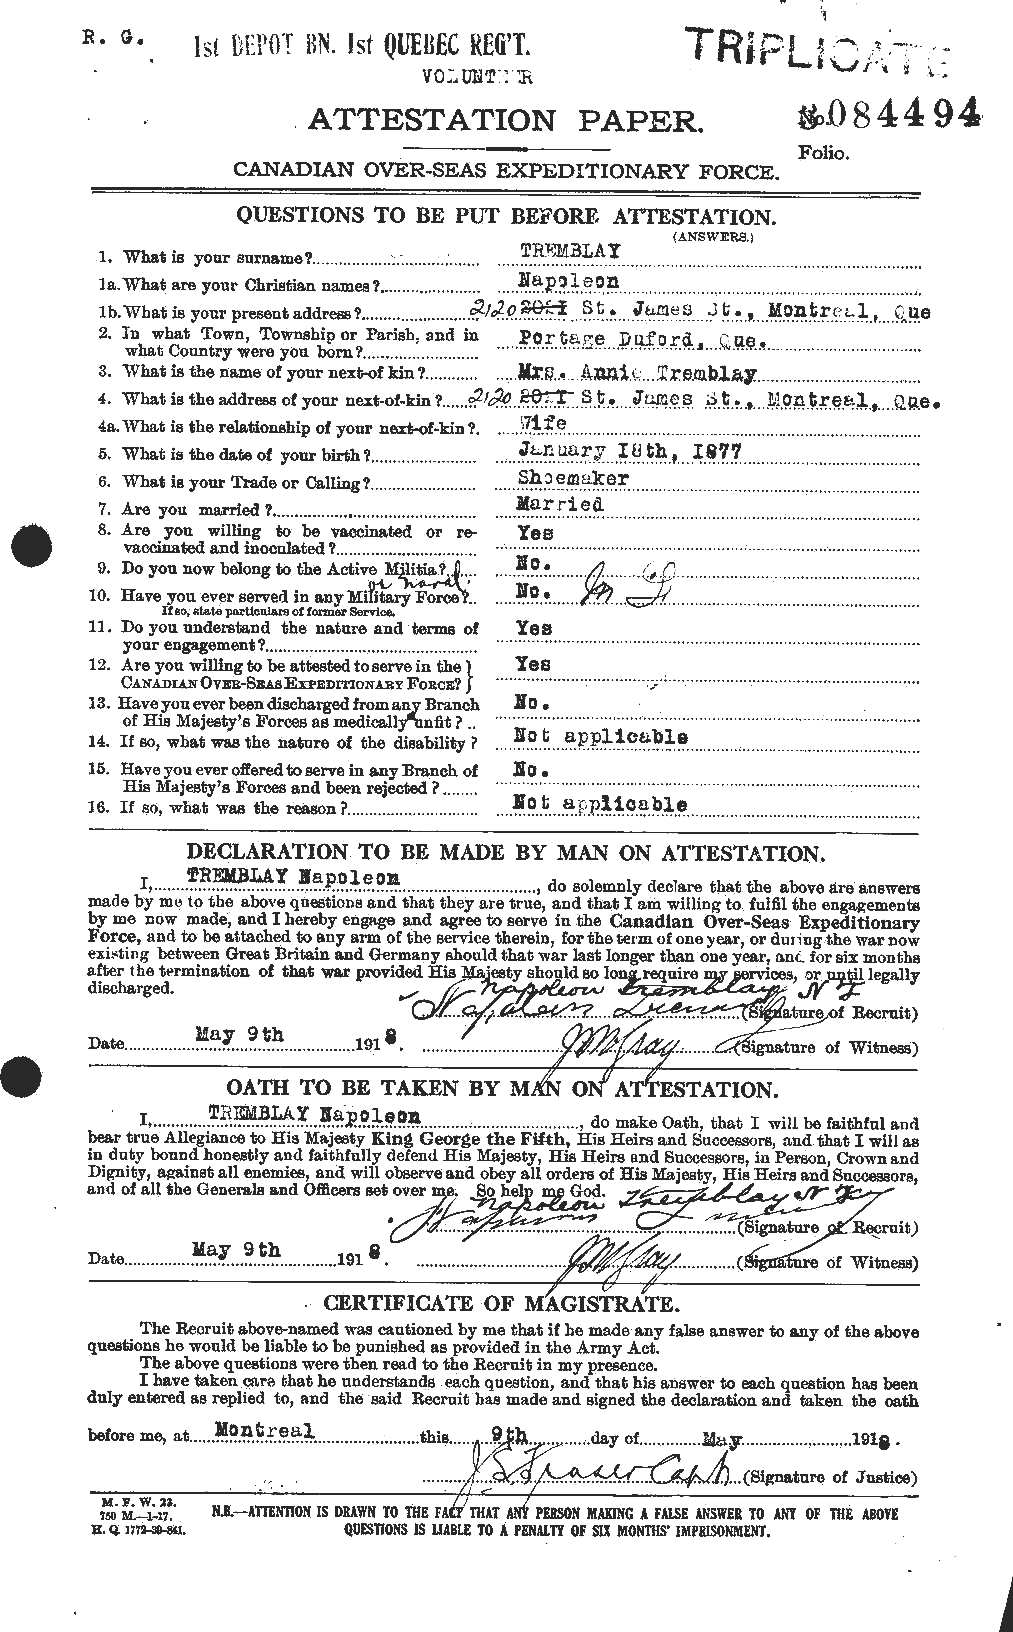 Personnel Records of the First World War - CEF 639209a